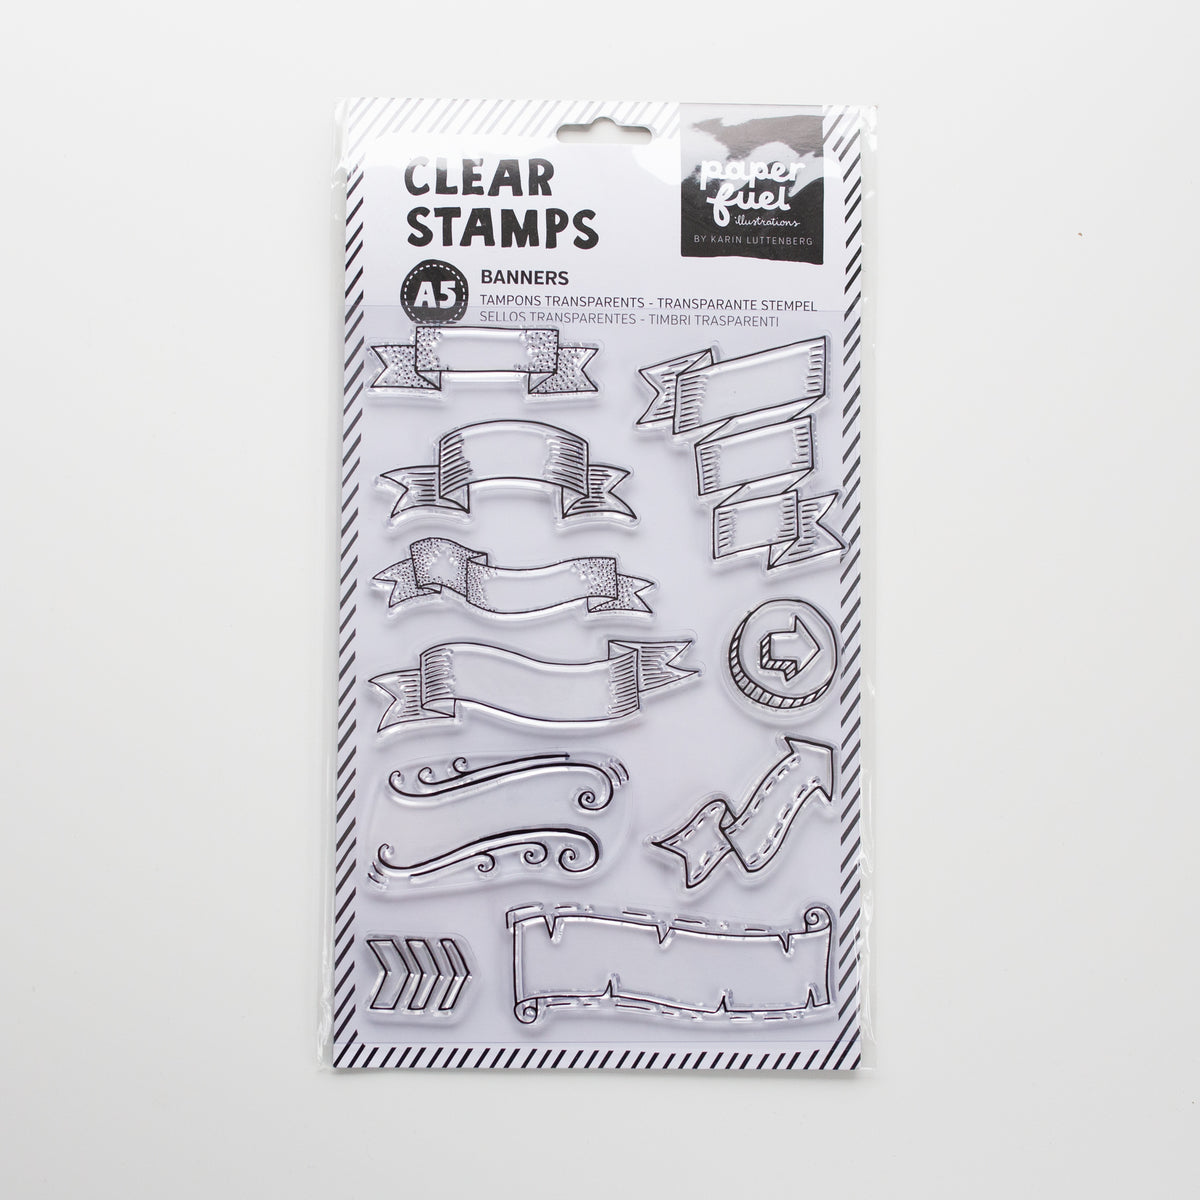 Paperfuel • Clear stamp A5 banners